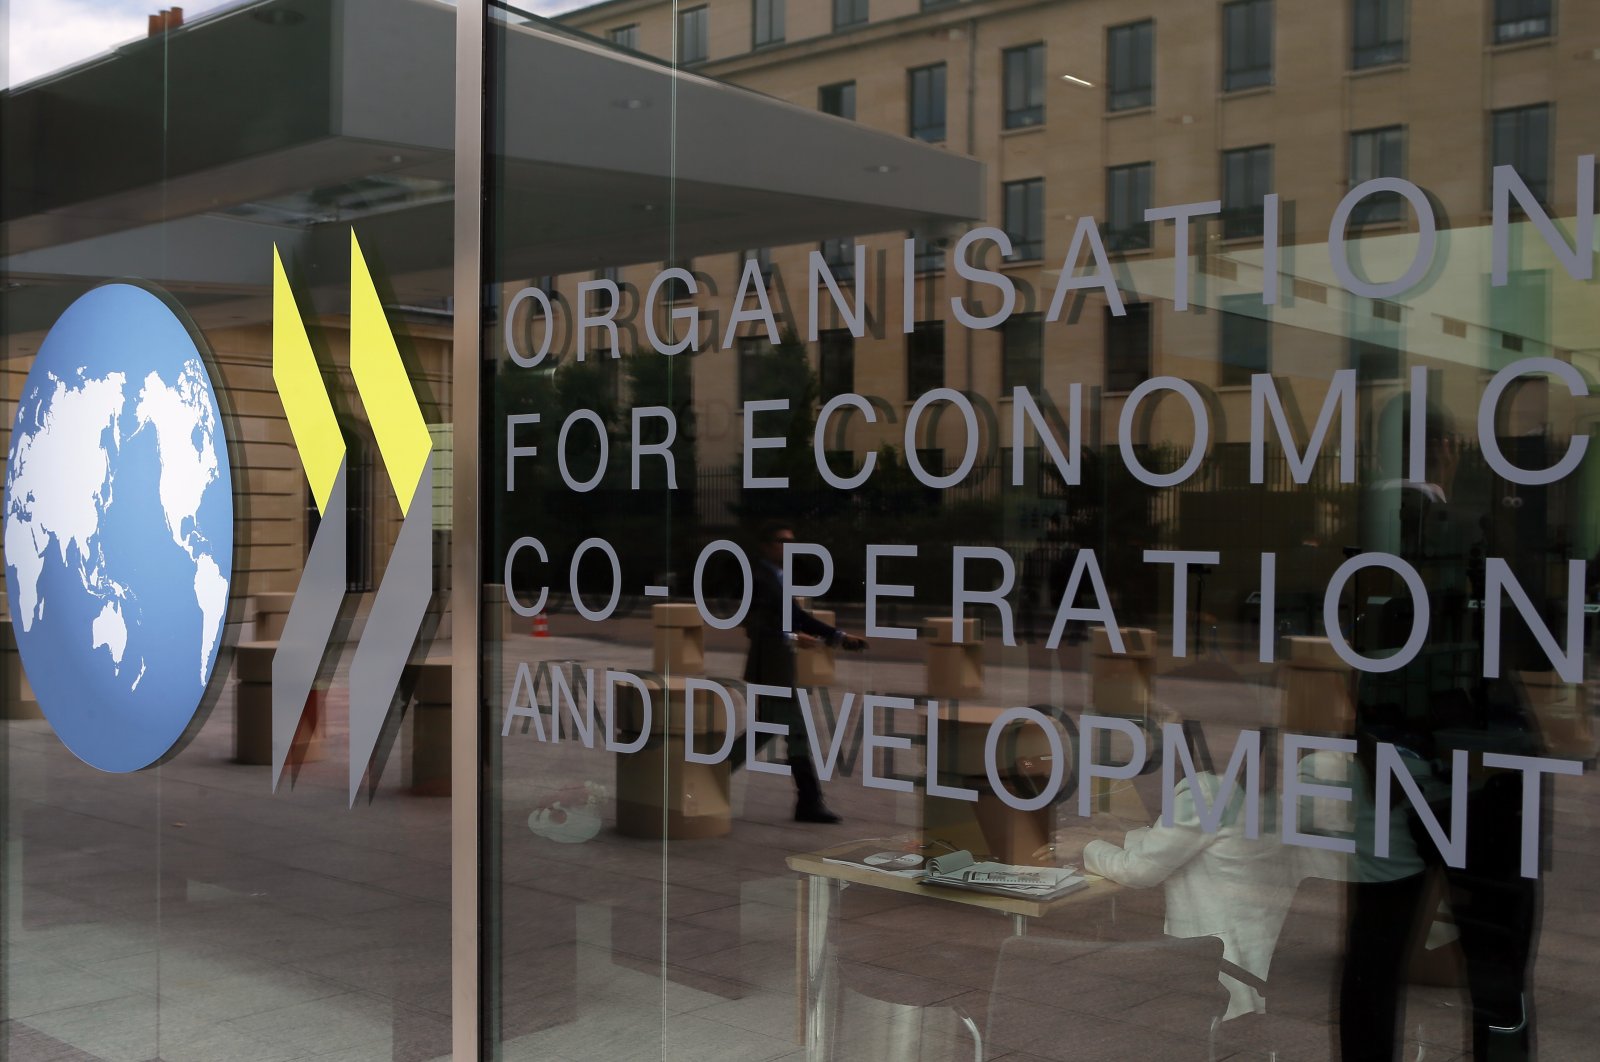 The logo at the entrance of the Organisation for Economic Co-operation and Development (OECD) headquarters in Paris, France, June 7, 2017. (AP Photo)